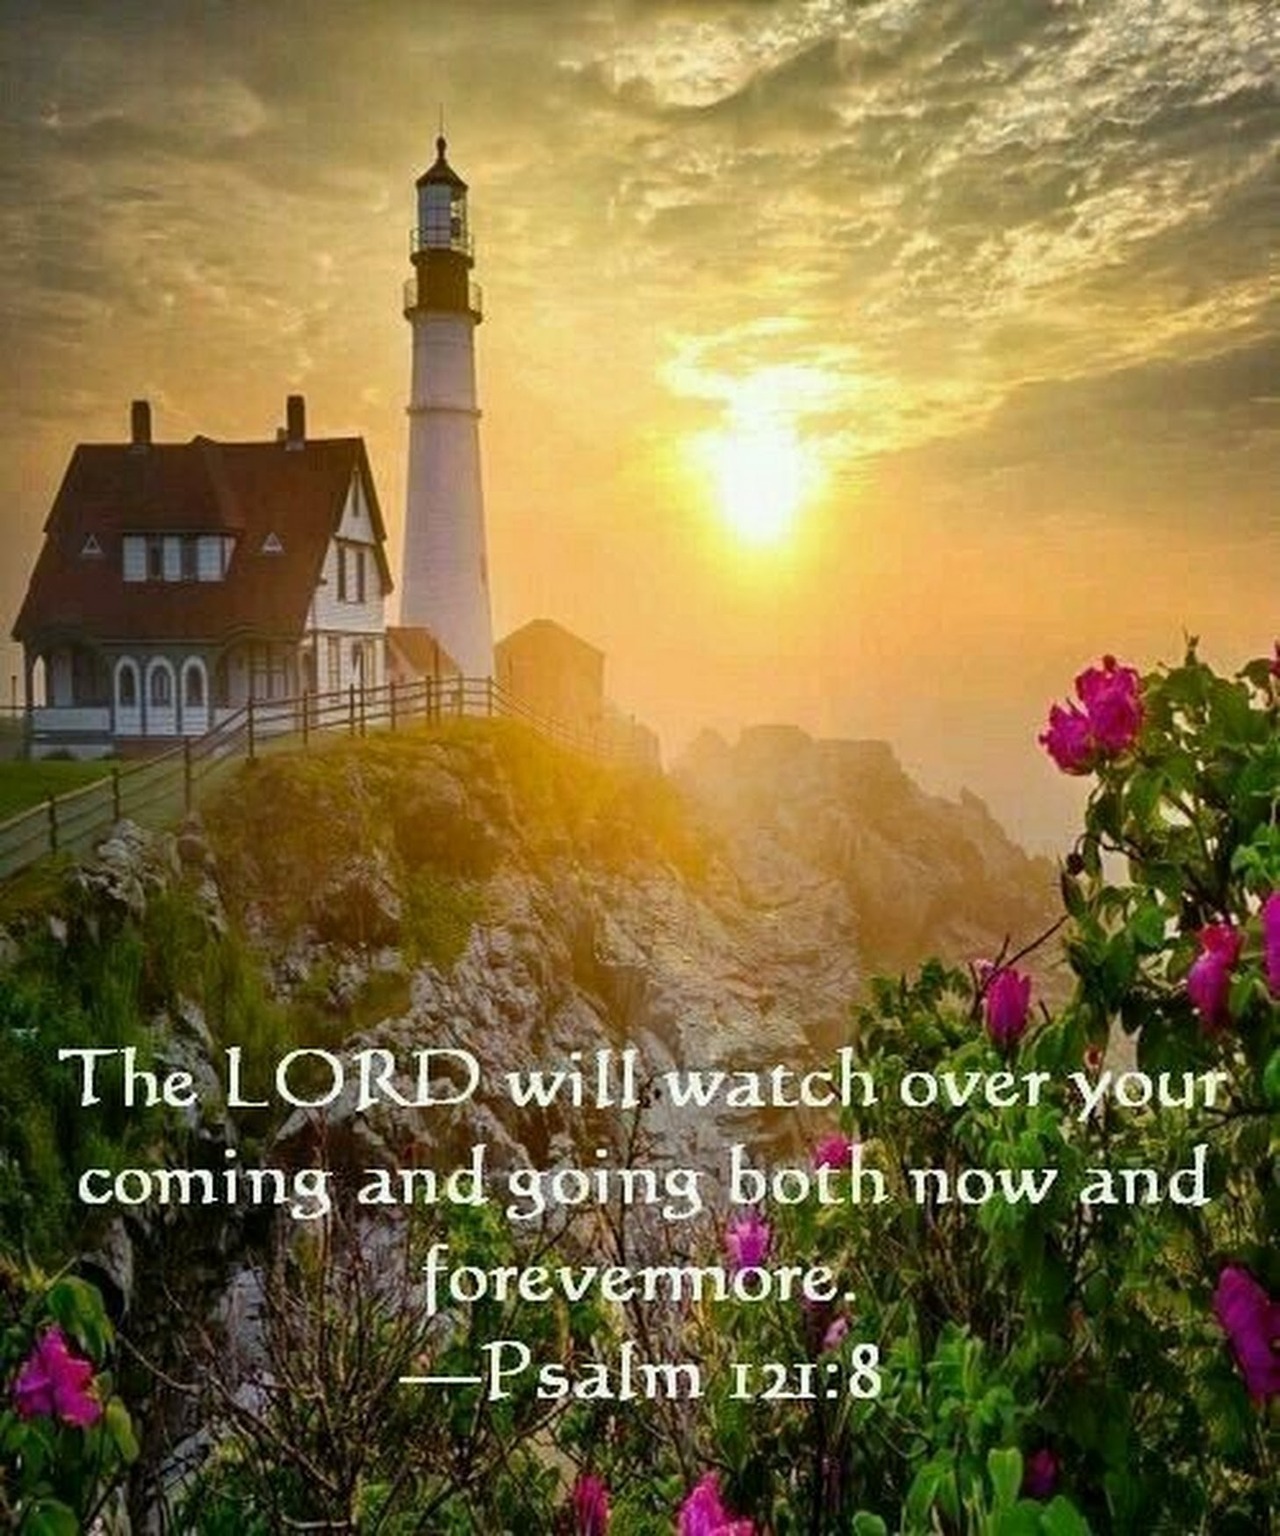 The Living... — Psalm 121:8 (NIV) - the LORD will watch over your...